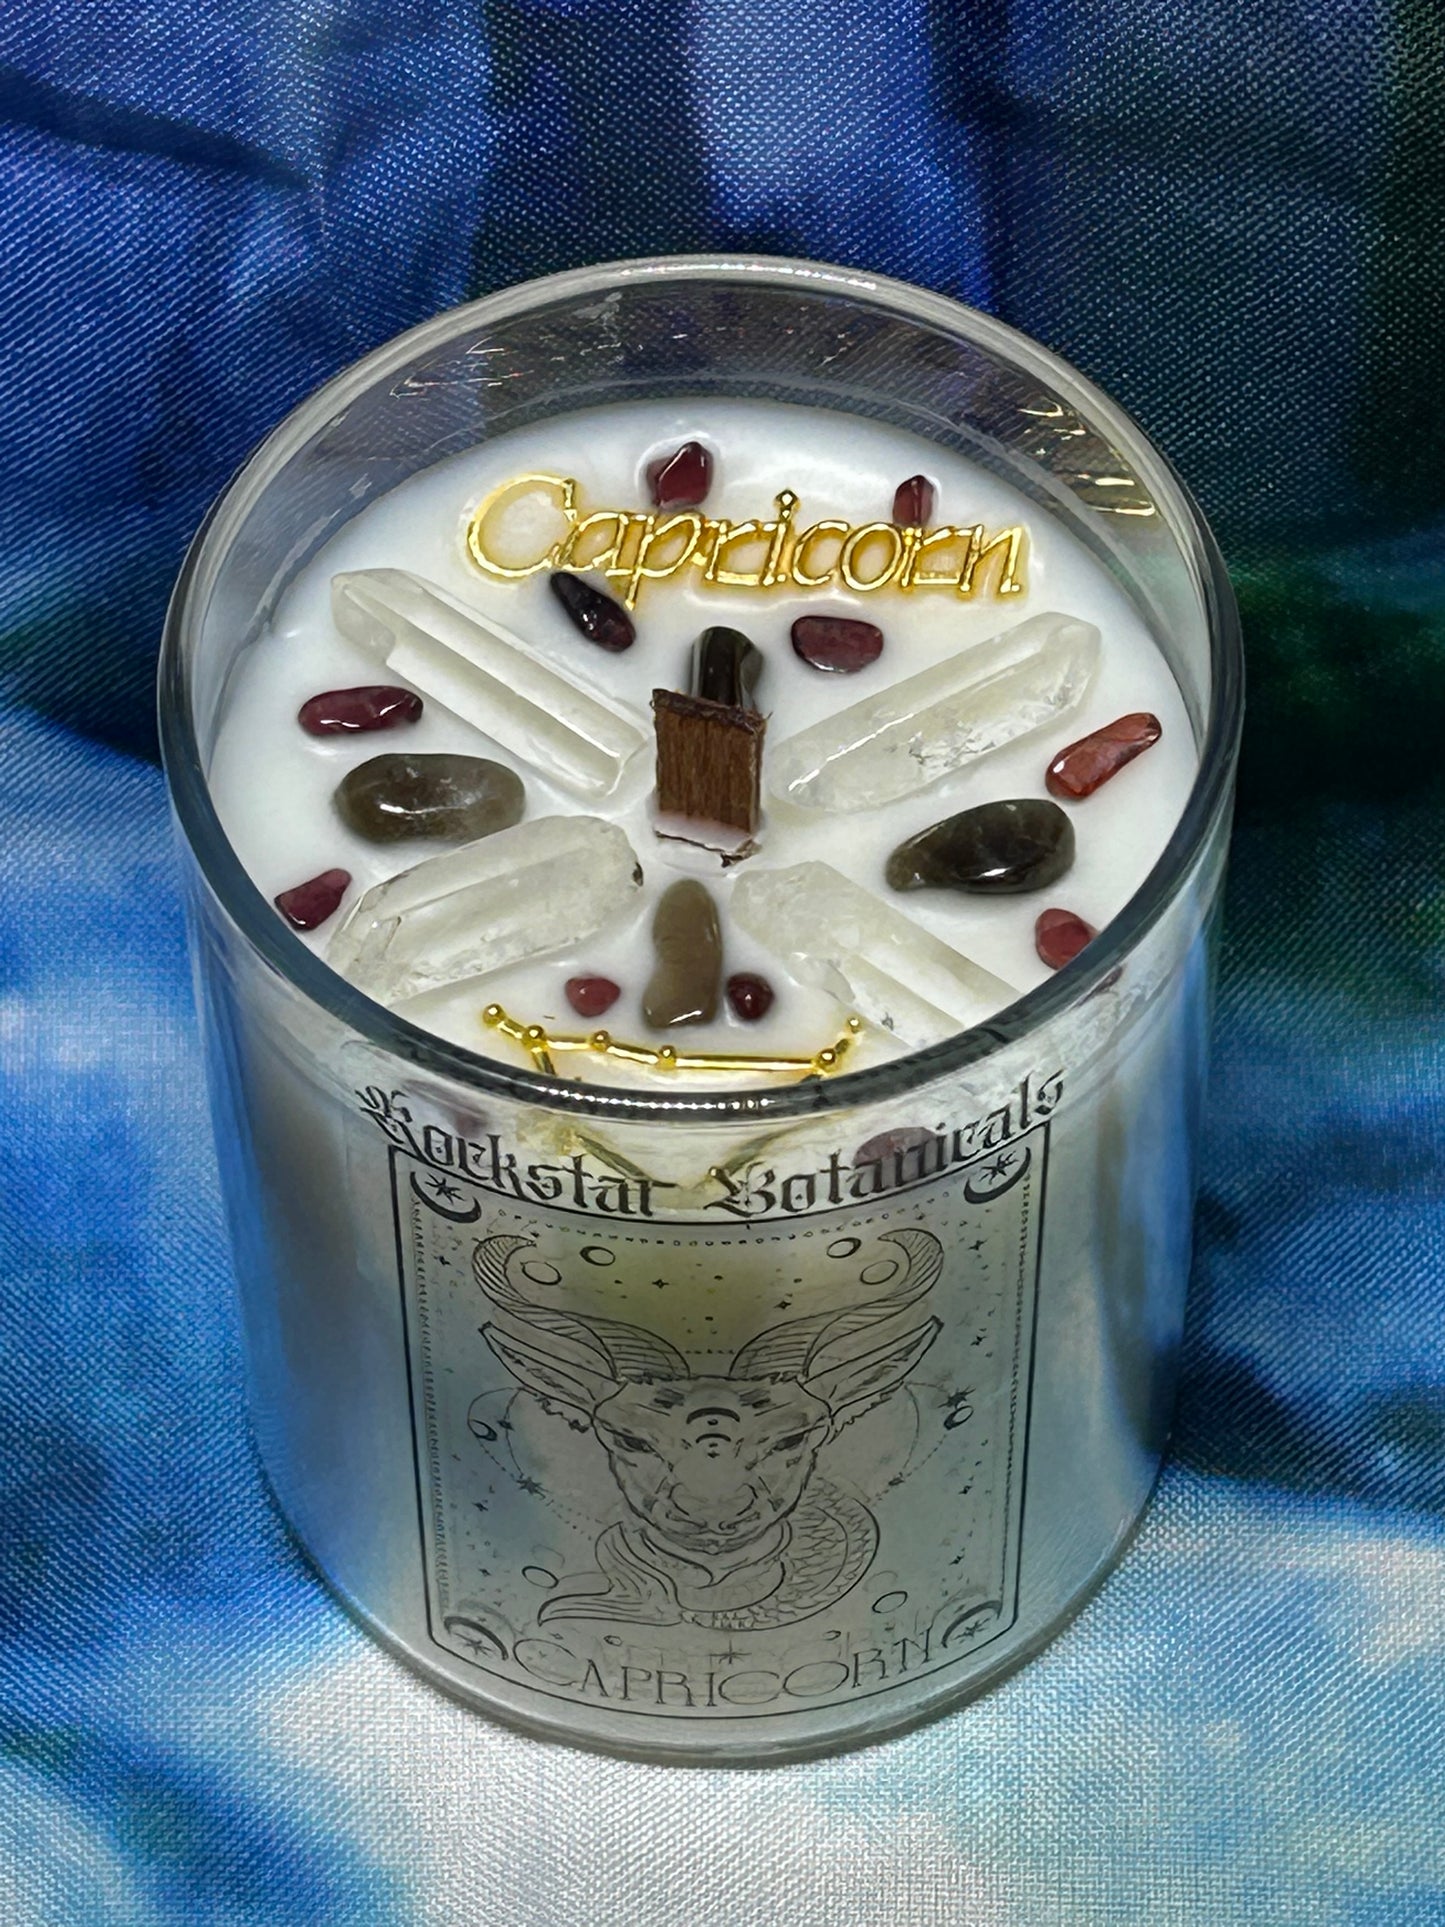 Capricorn Candle Crystal Intention Crackling Wood Wick Zodiac